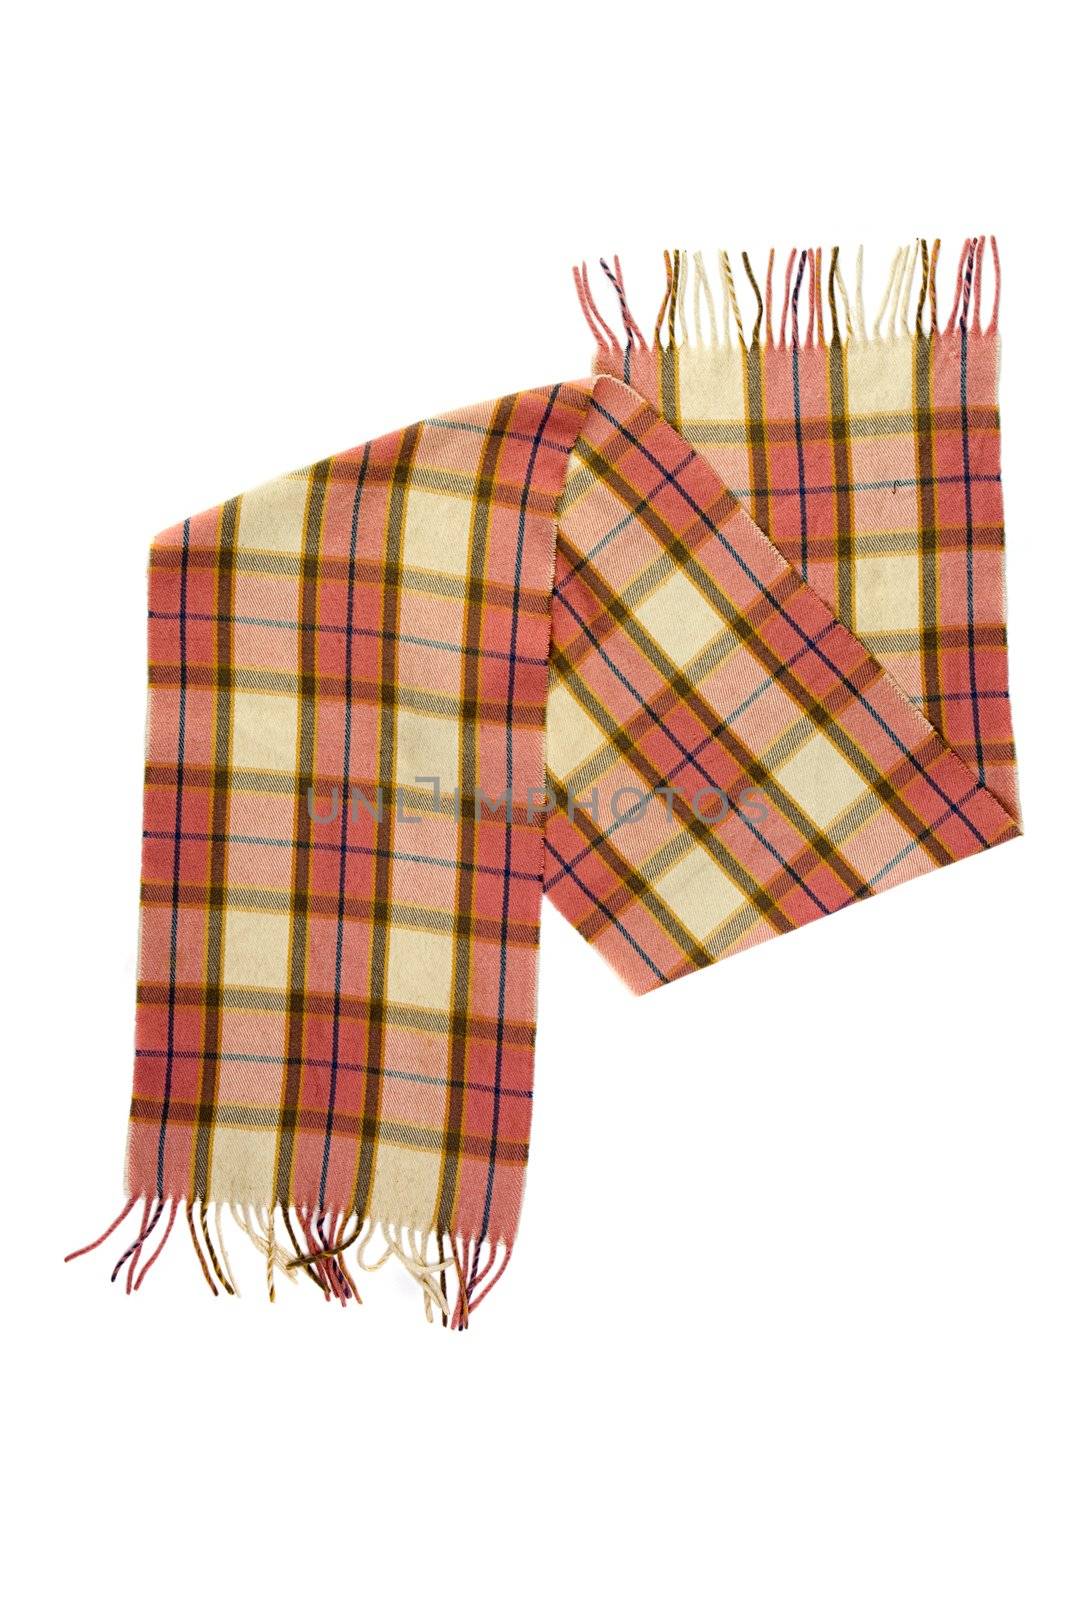 Checkered scarf by Gravicapa